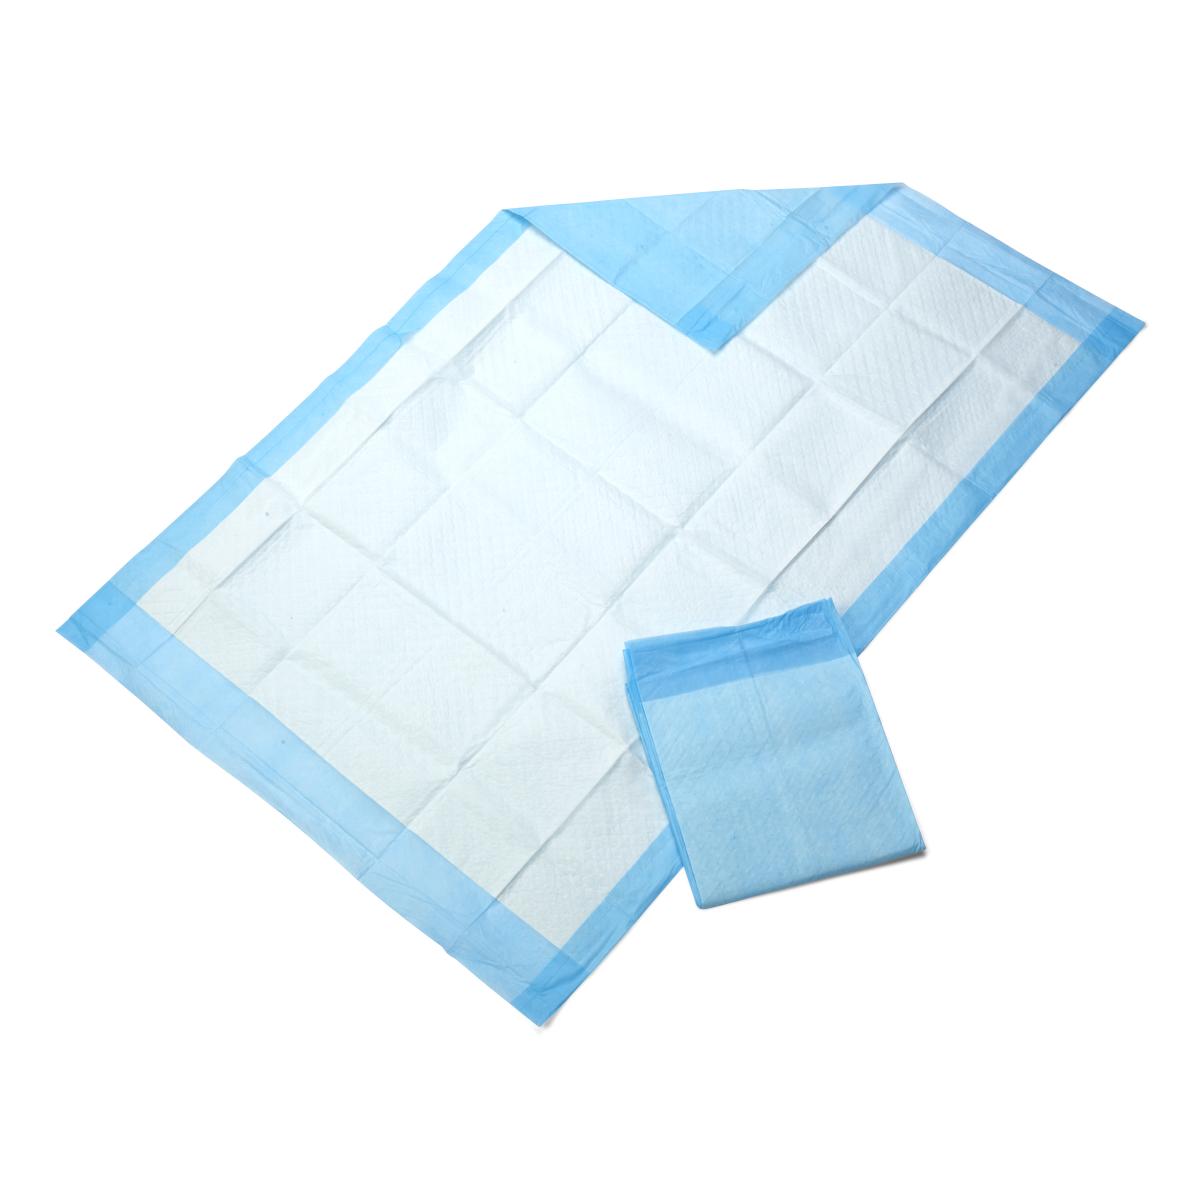 Custom Incontinence Pad, Blue, 23"x 36", Case of 120